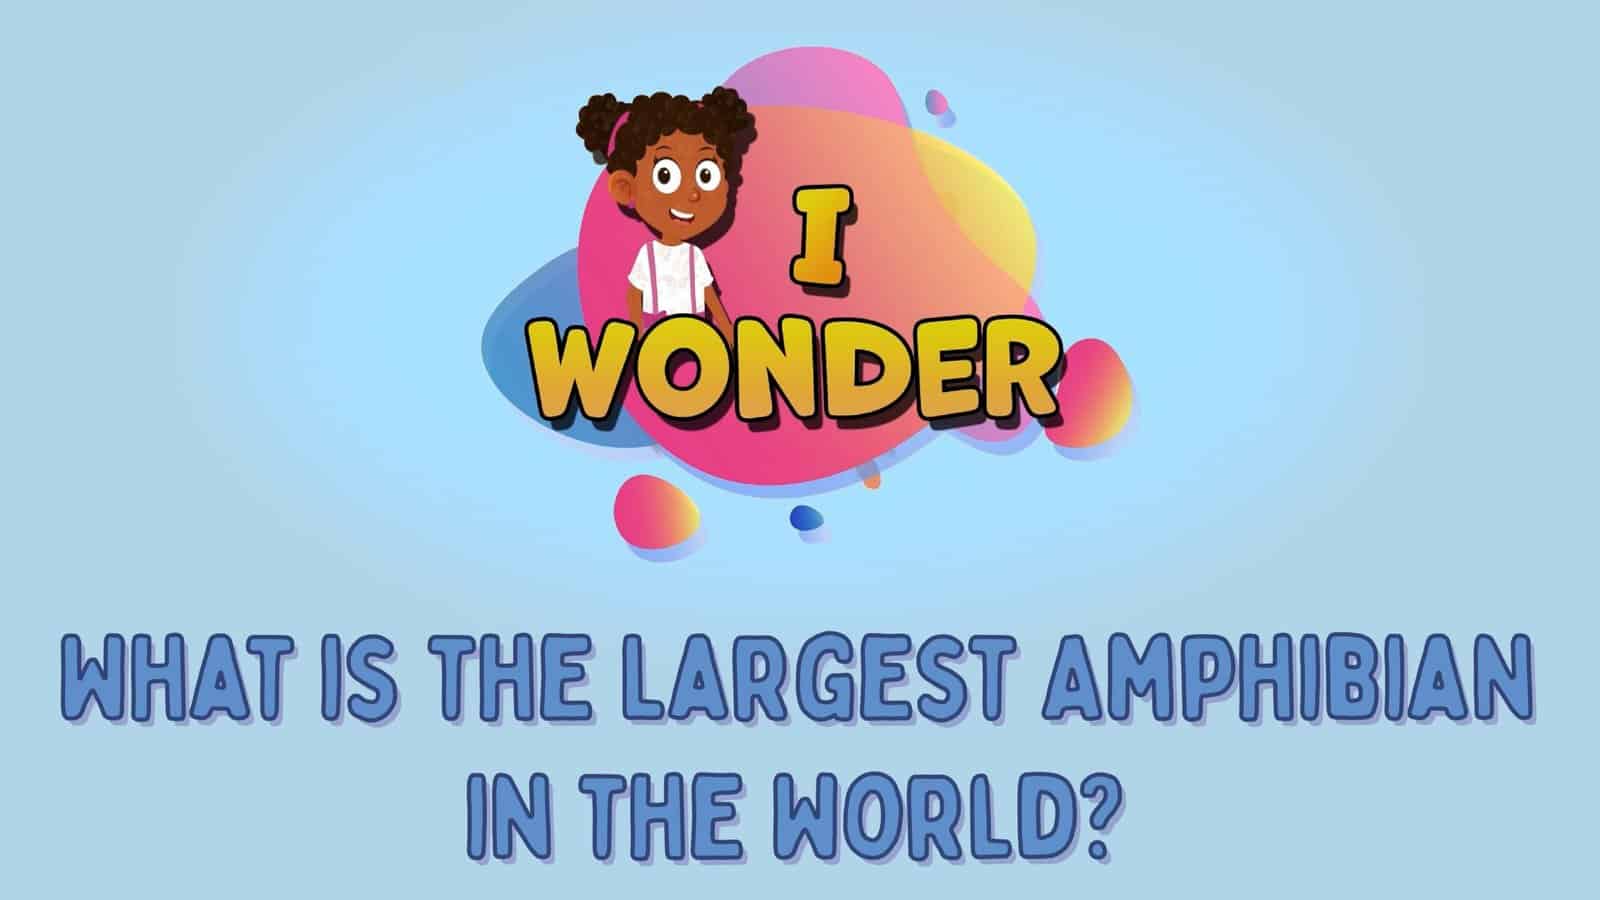 What Is The Largest Amphibian In The World?